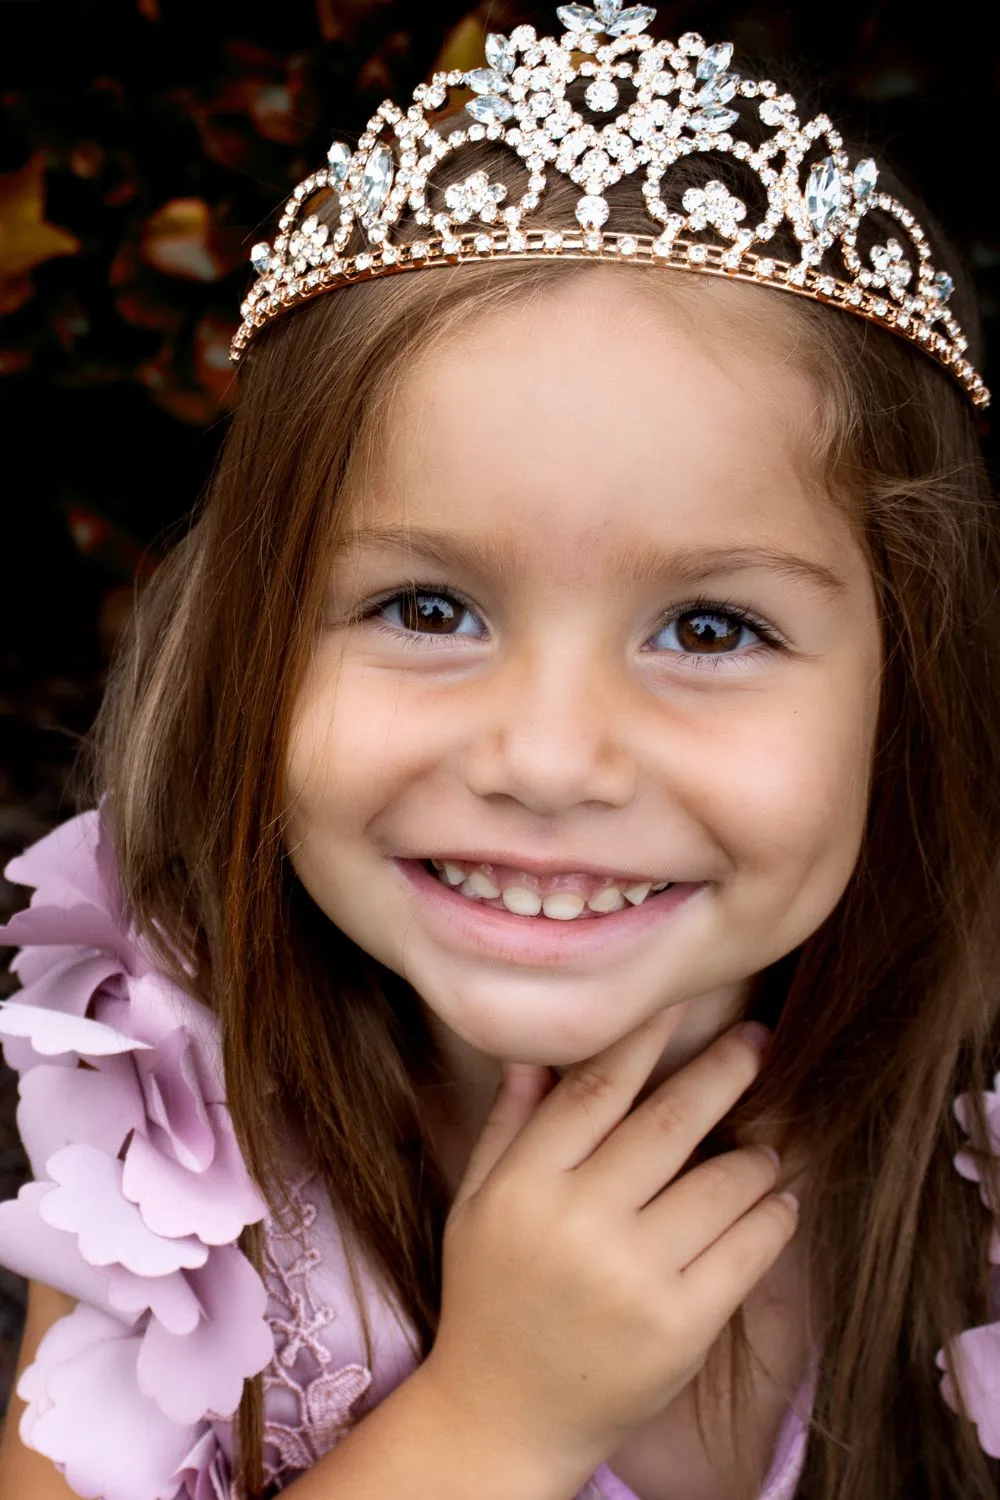 little girl smiling with a tiara and birthday princess gown